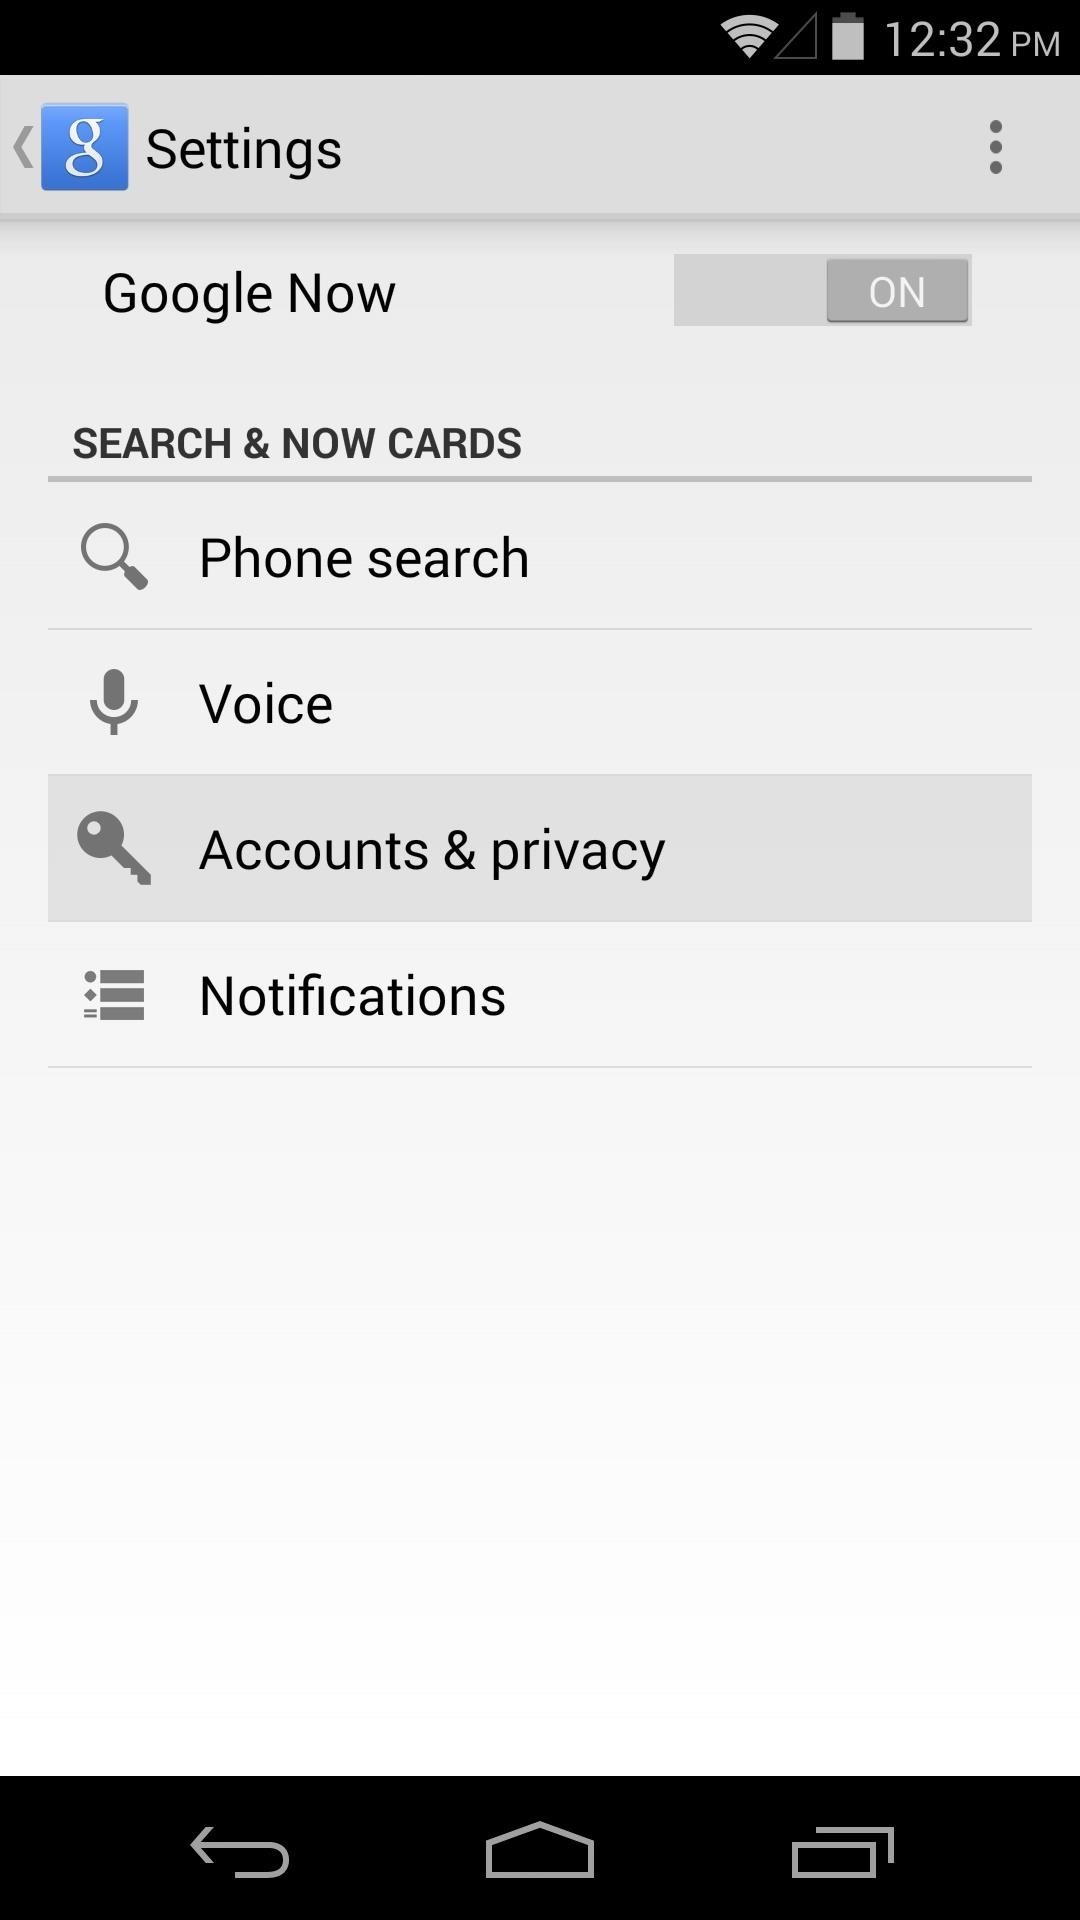 Get Auto Reminders to Pay Bills & Cancel Trial Subscriptions Using Google Now (Android & iOS)